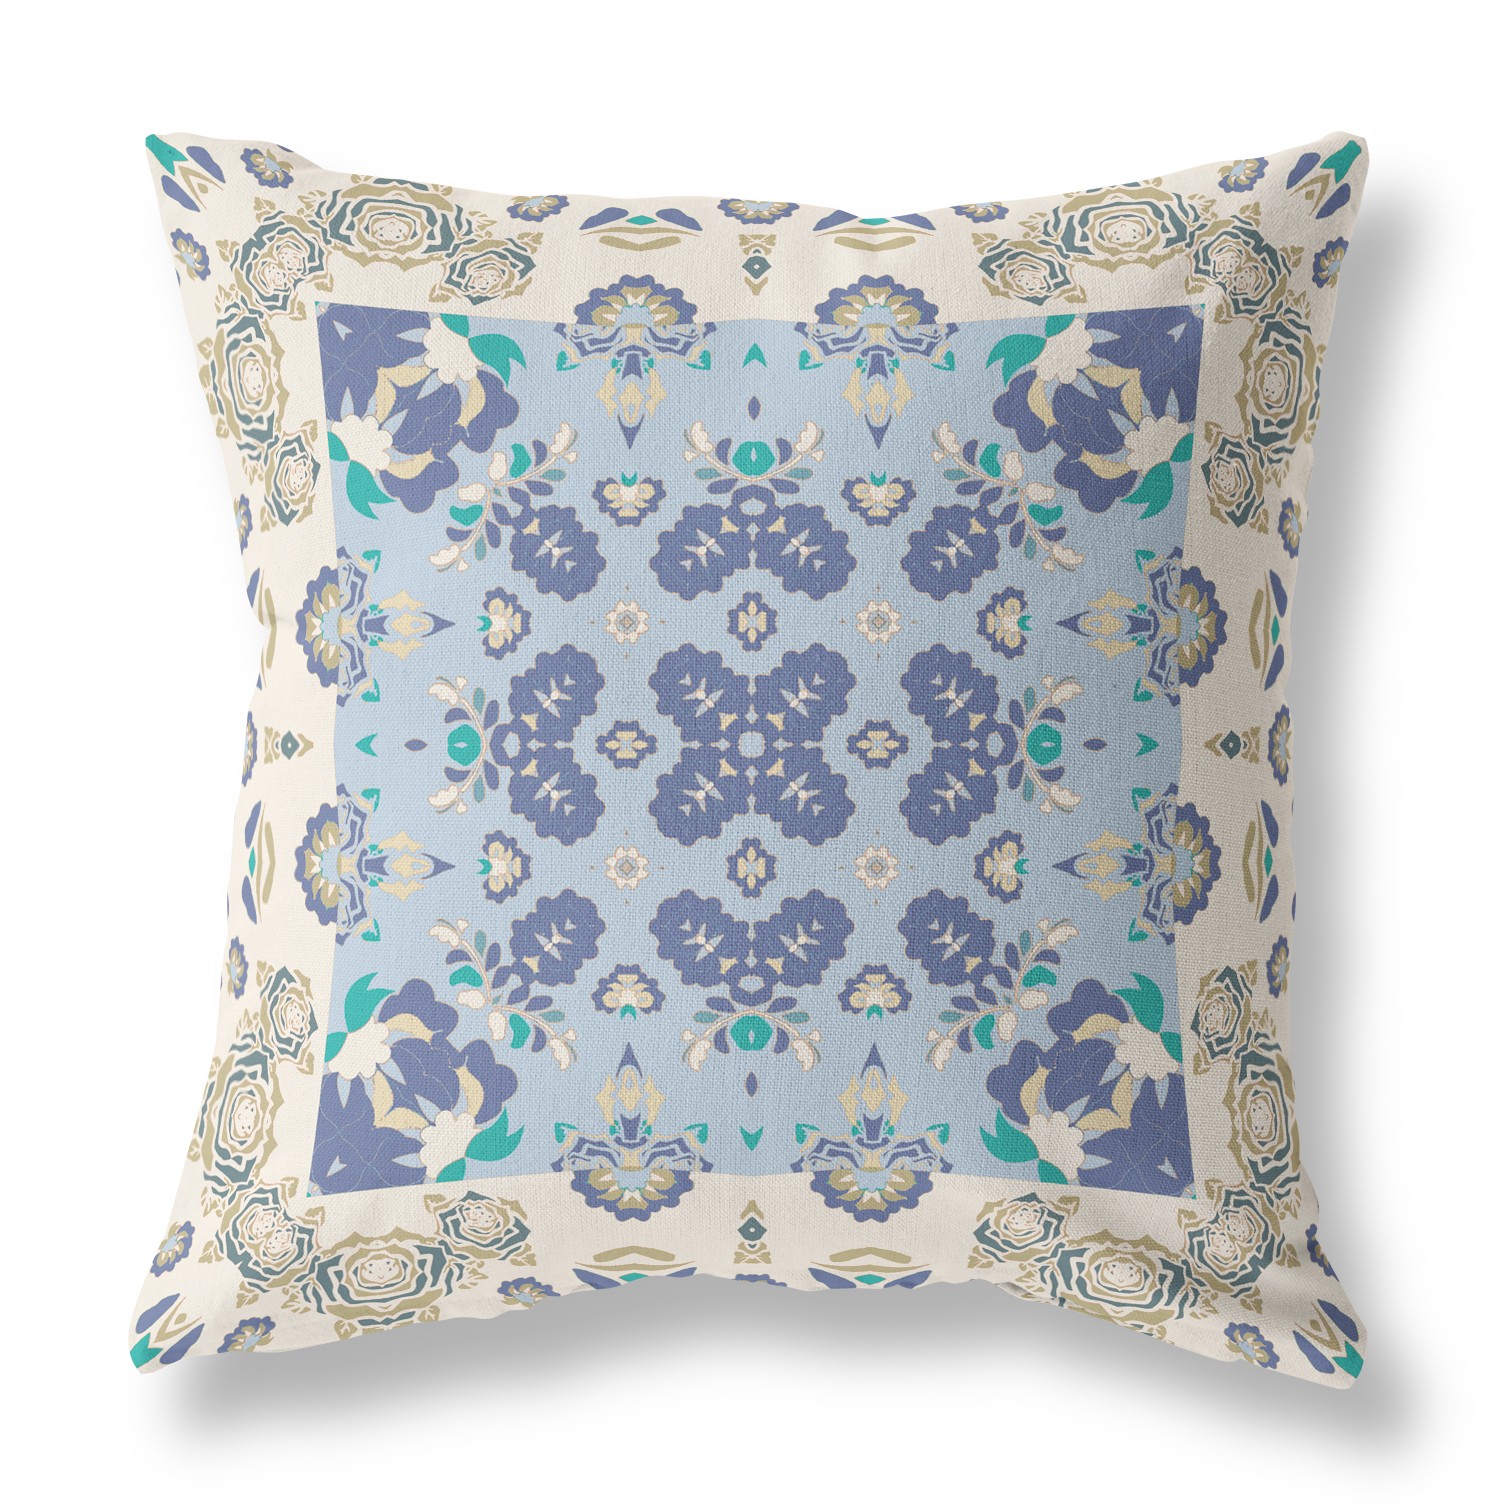 18” White Blue Rose Box Indoor Outdoor Zippered Throw Pillow-411136-1